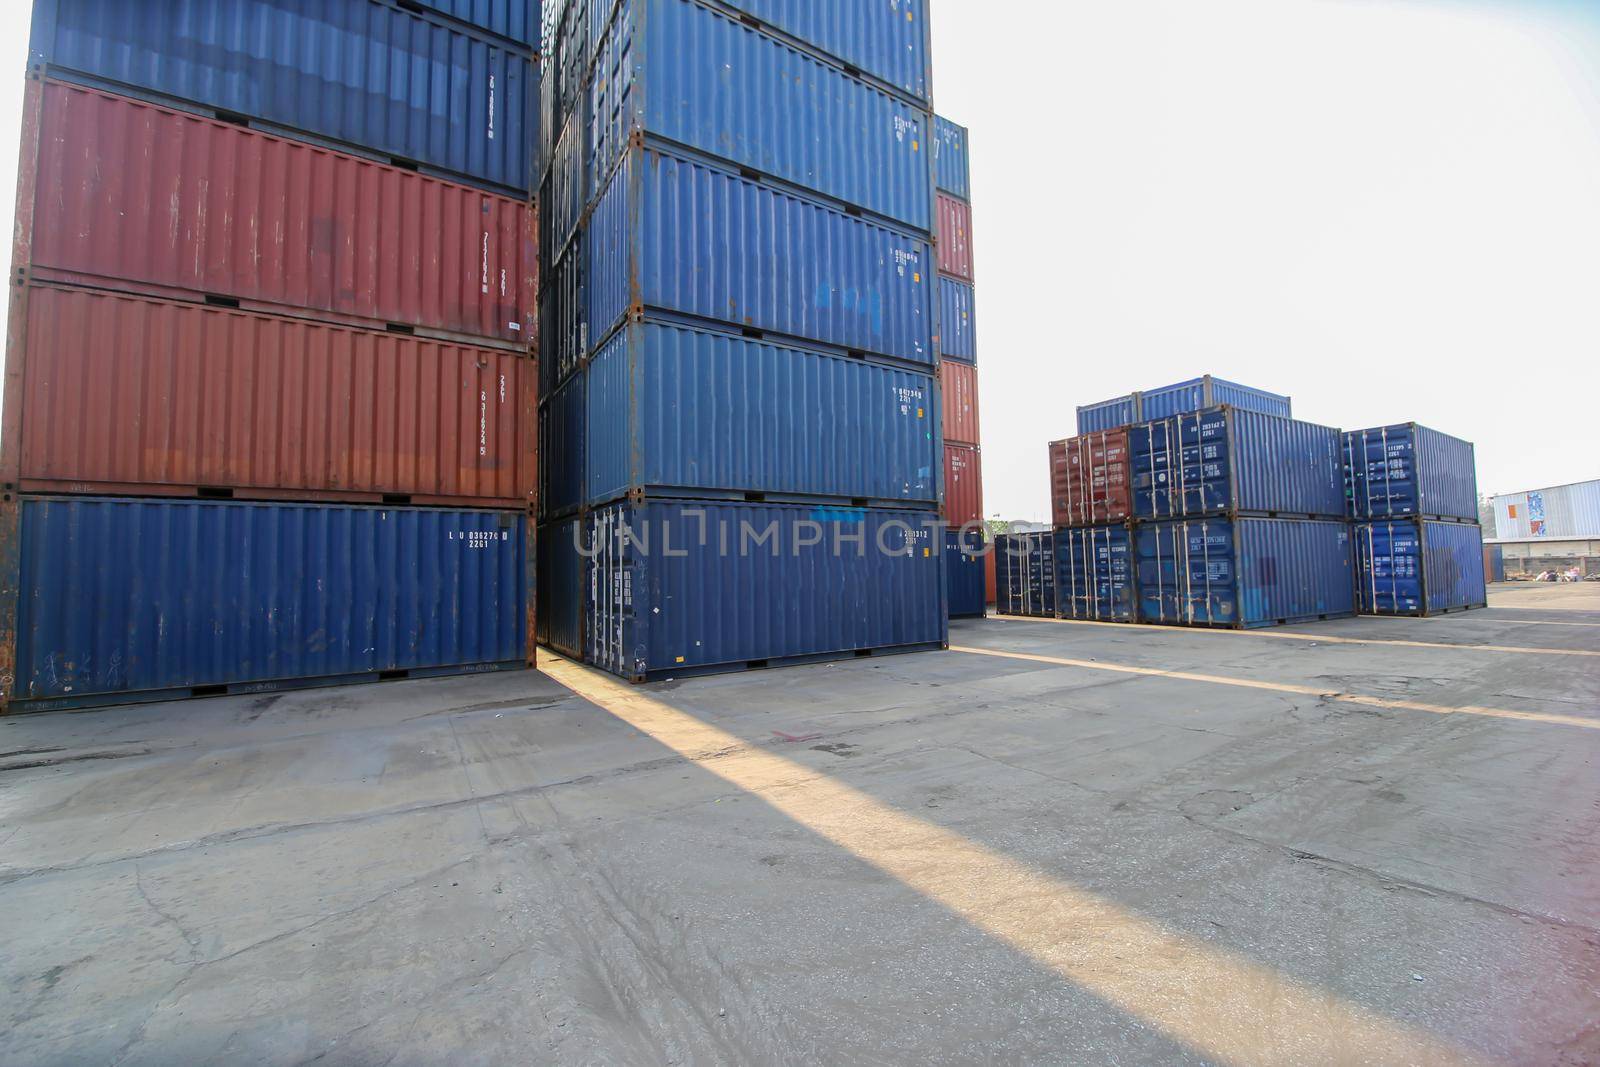 Foreman control loading Containers box from Cargo freight ship for import export. Container Warehouse Worker